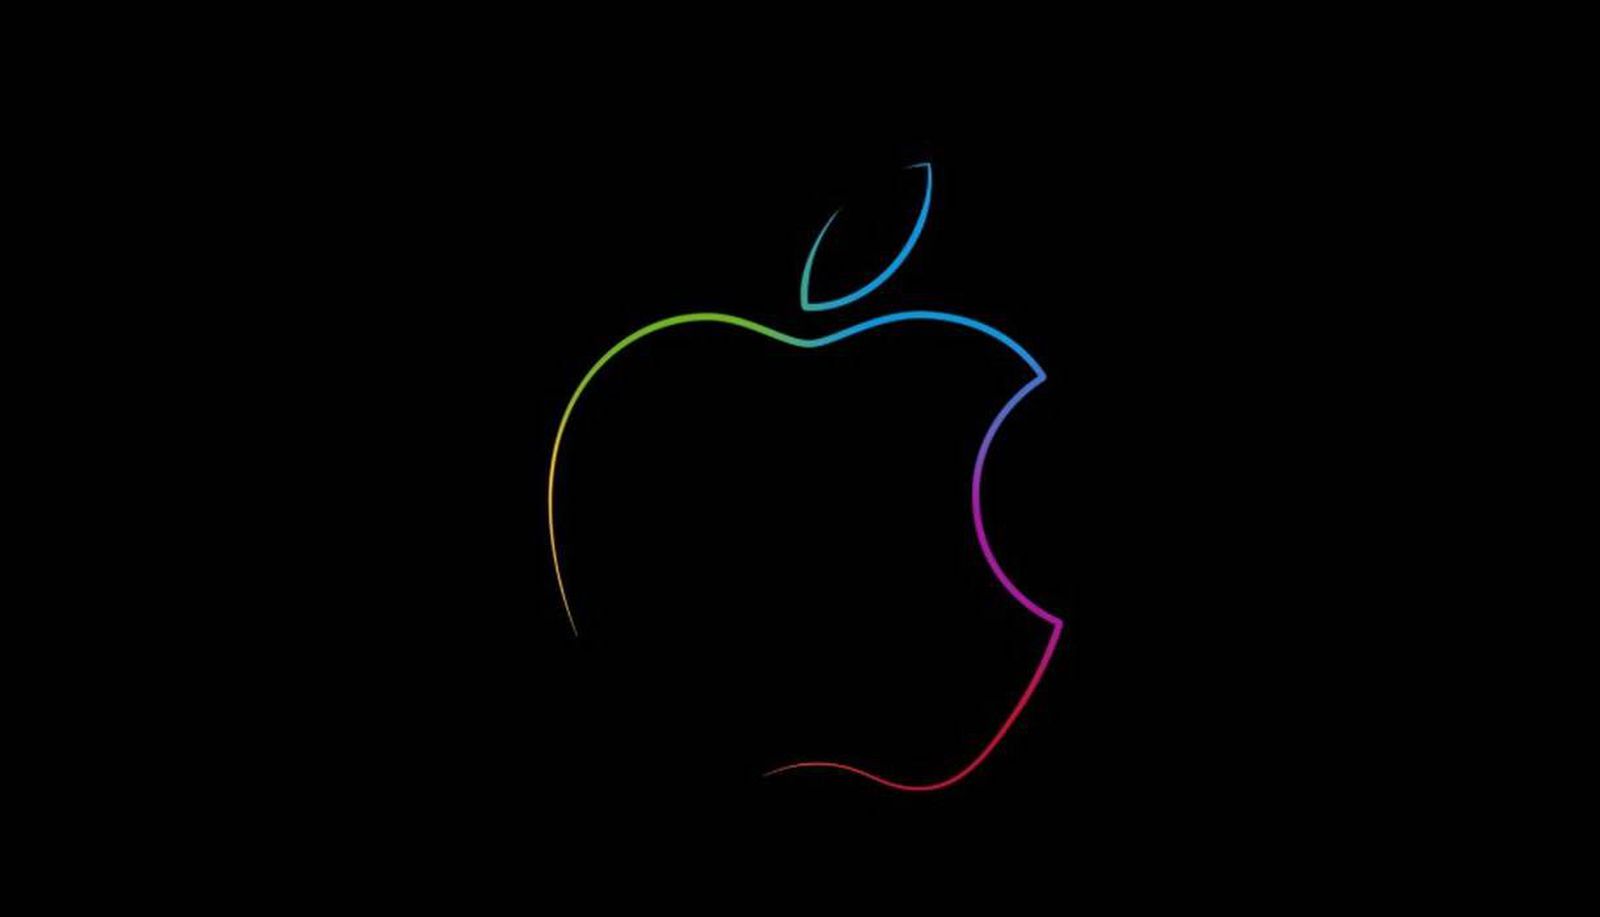 Online Apple Store Goes Down Ahead of 'Unleashed' Apple Event